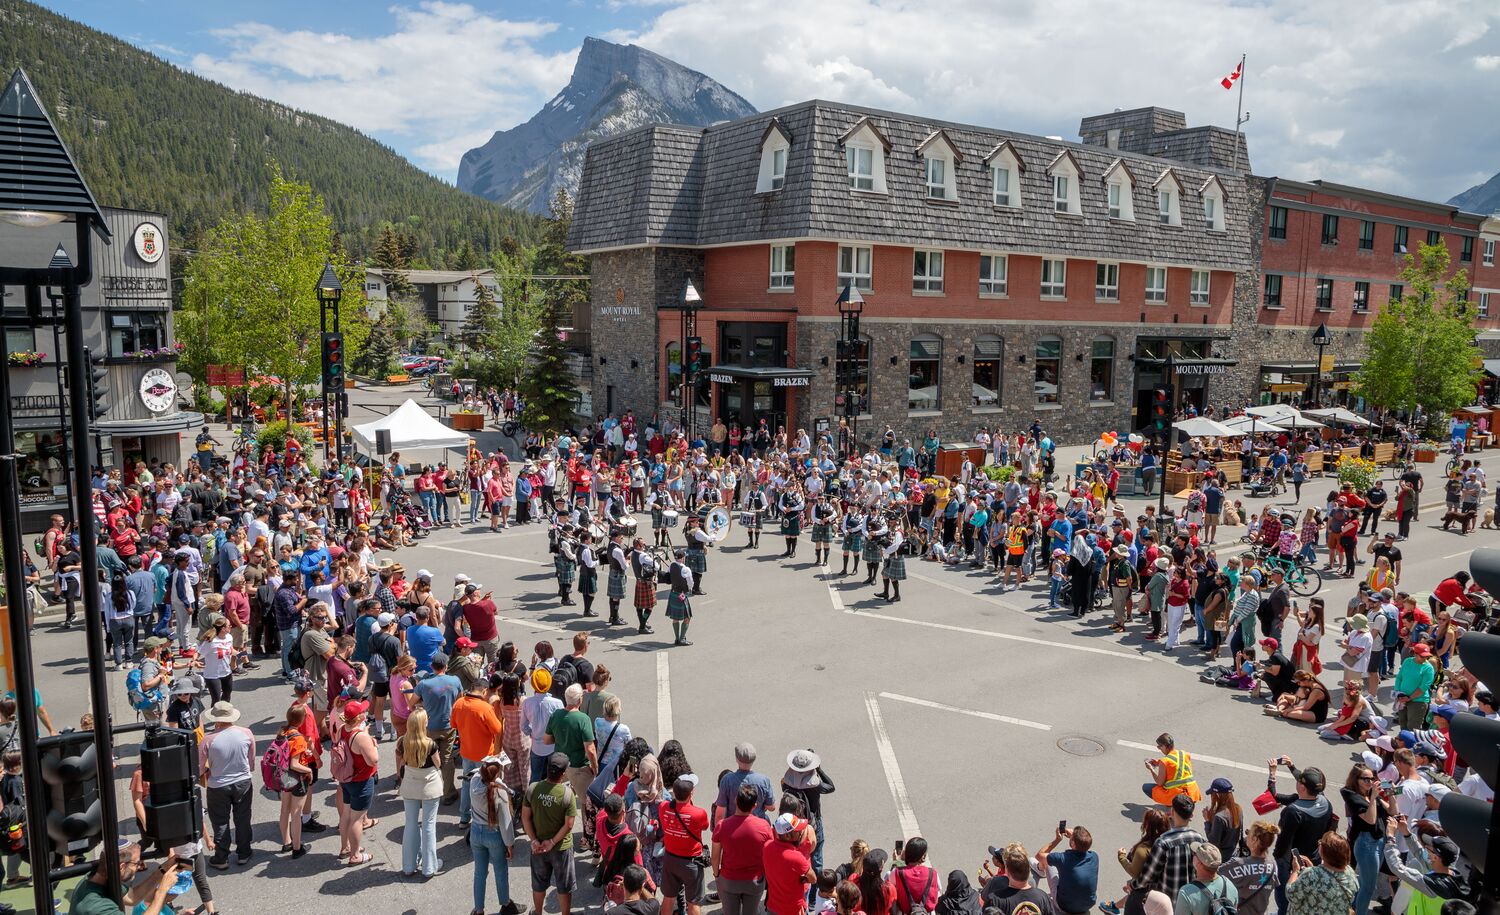 Musicians on Banff Ave during Canada Day in Banff National Park.